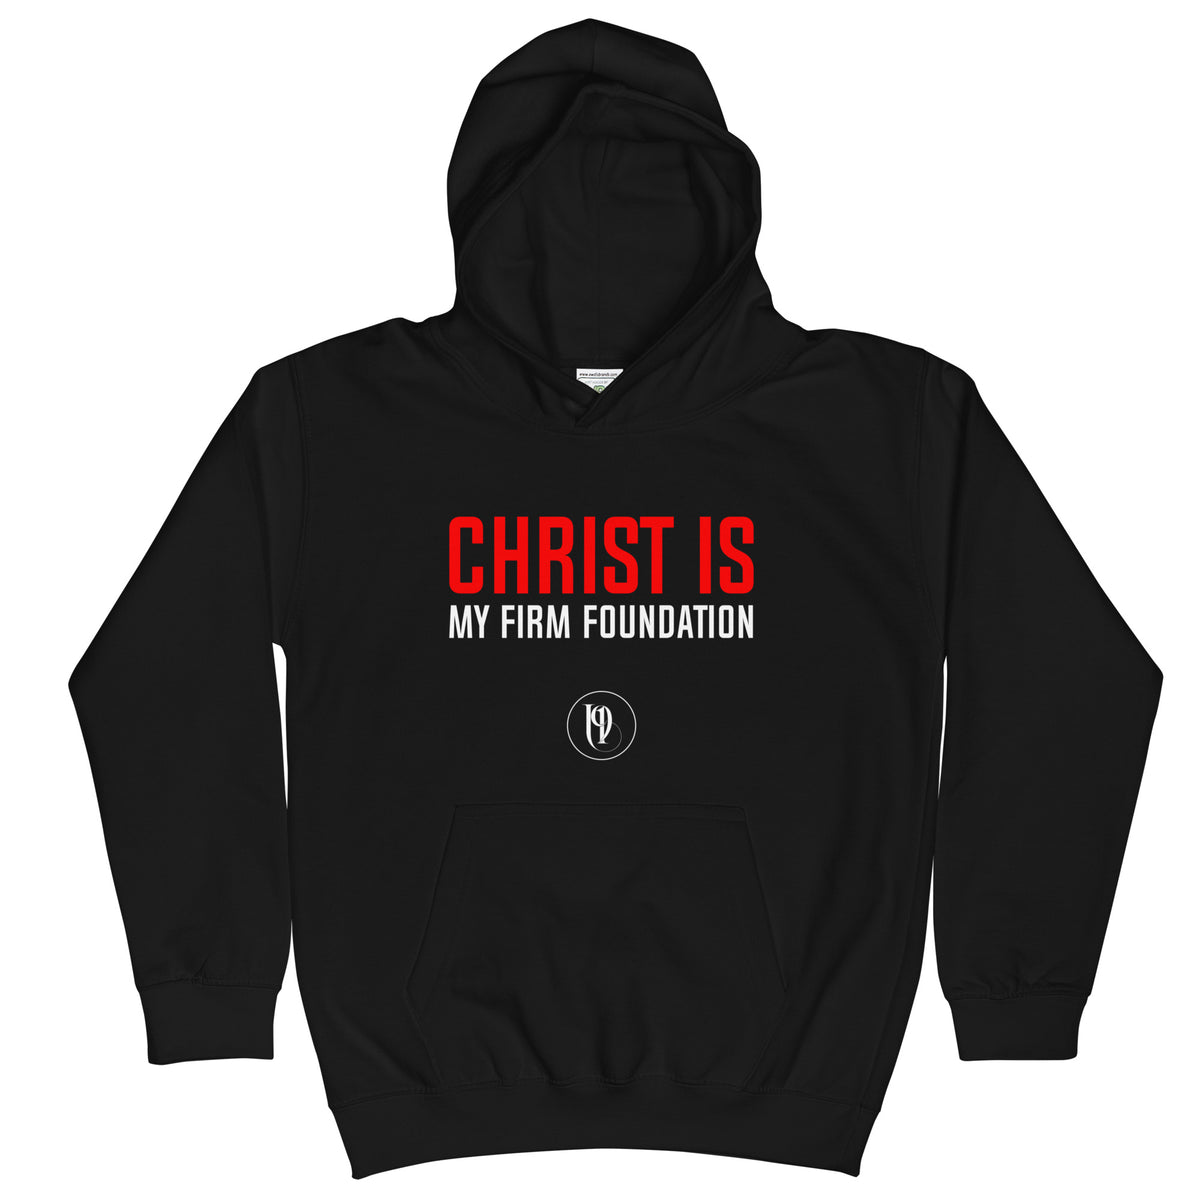 CHRIST IS MY FIRM FOUNDATION I KIDS HOODIE